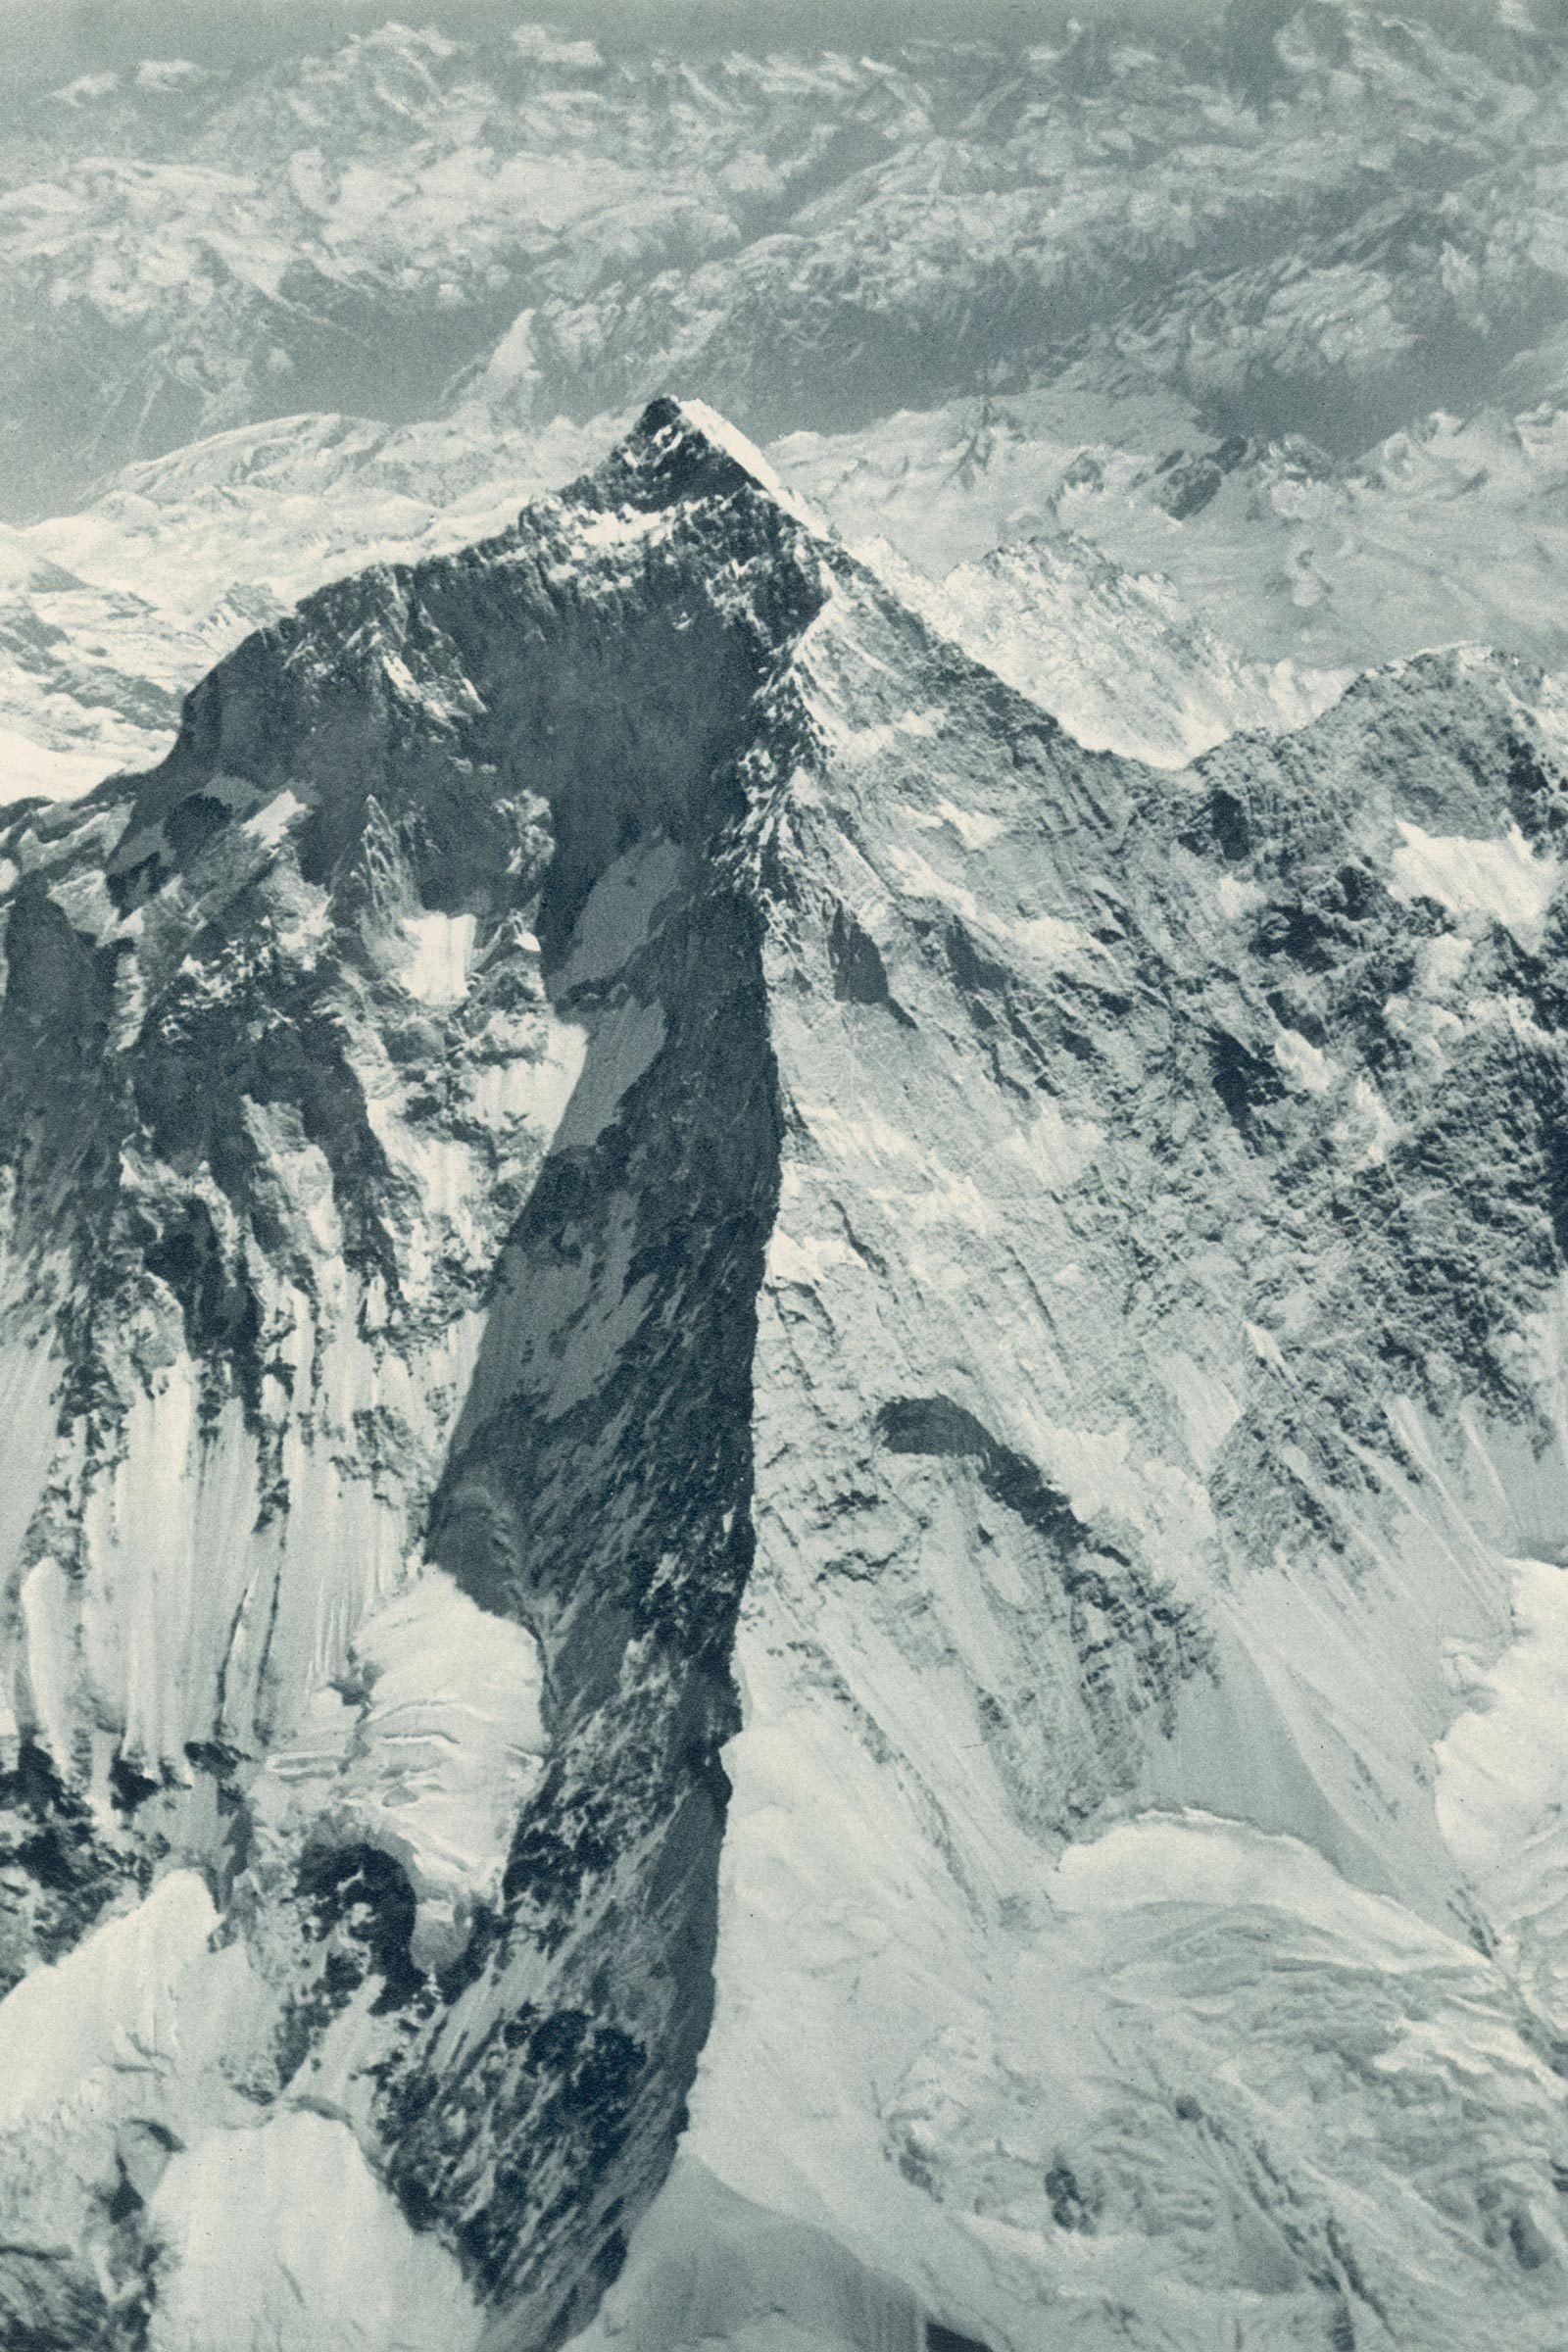 The First Aerial Photograph of Mt Everest's Summit